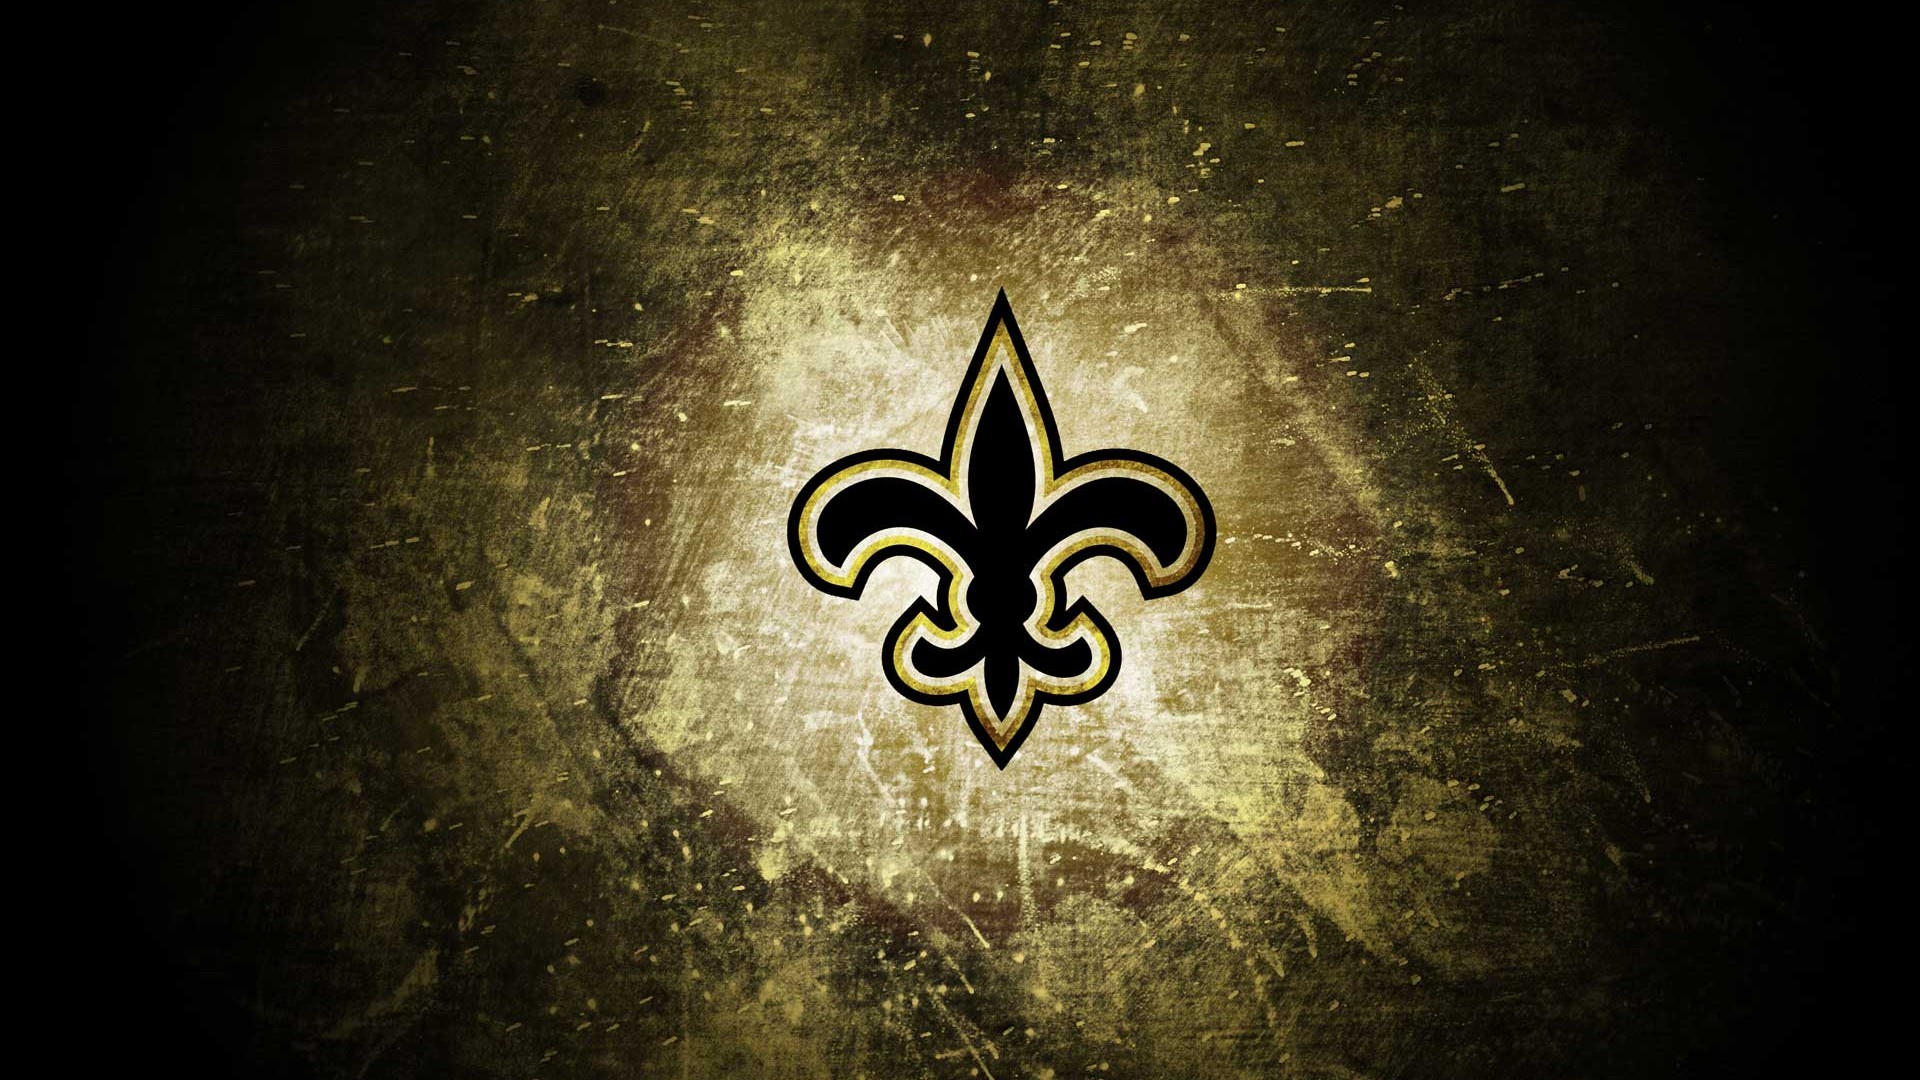 HD New Orleans Saints Wallpapers With Resolution 1920X1080 pixel. You can make this wallpaper for your Mac or Windows Desktop Background, iPhone, Android or Tablet and another Smartphone device for free